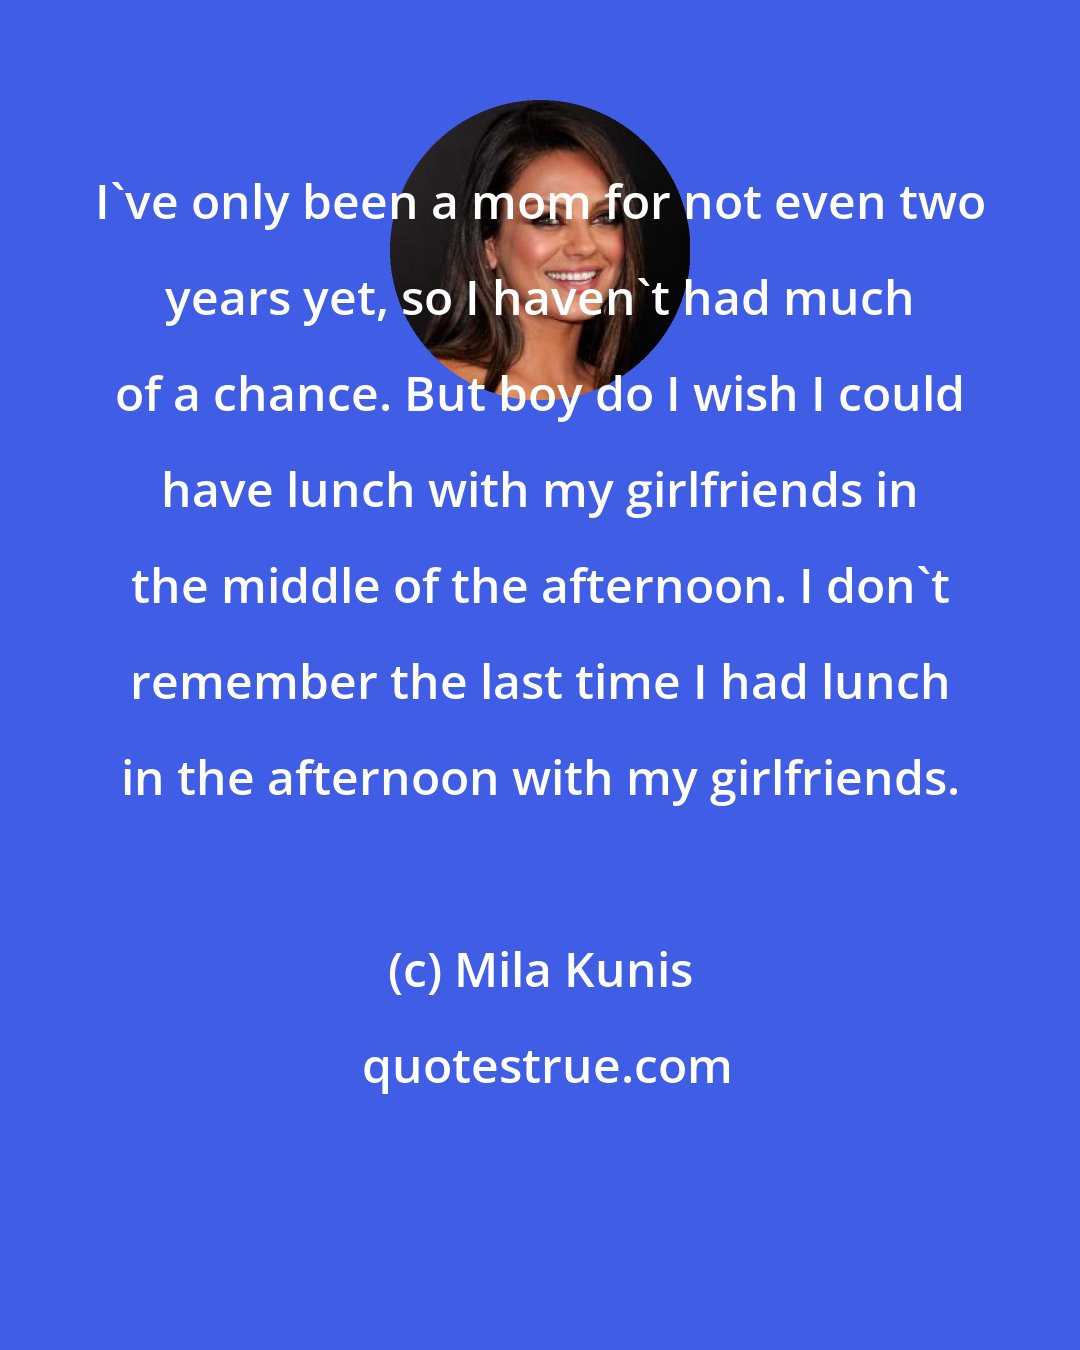 Mila Kunis: I've only been a mom for not even two years yet, so I haven't had much of a chance. But boy do I wish I could have lunch with my girlfriends in the middle of the afternoon. I don't remember the last time I had lunch in the afternoon with my girlfriends.